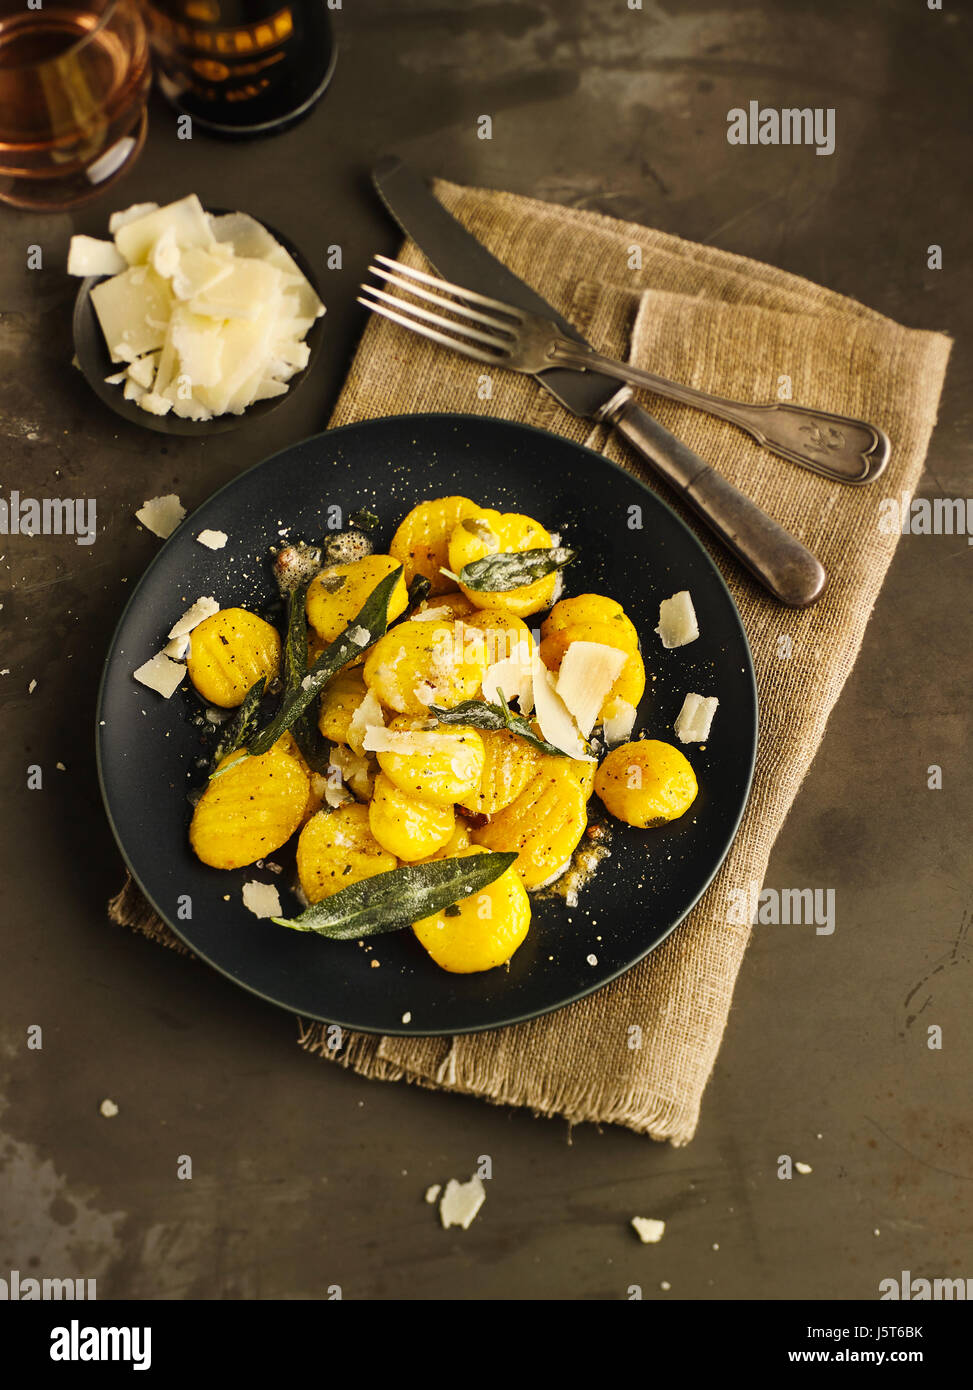 Potato gnocchi with pumpkin in sage butter Stock Photo